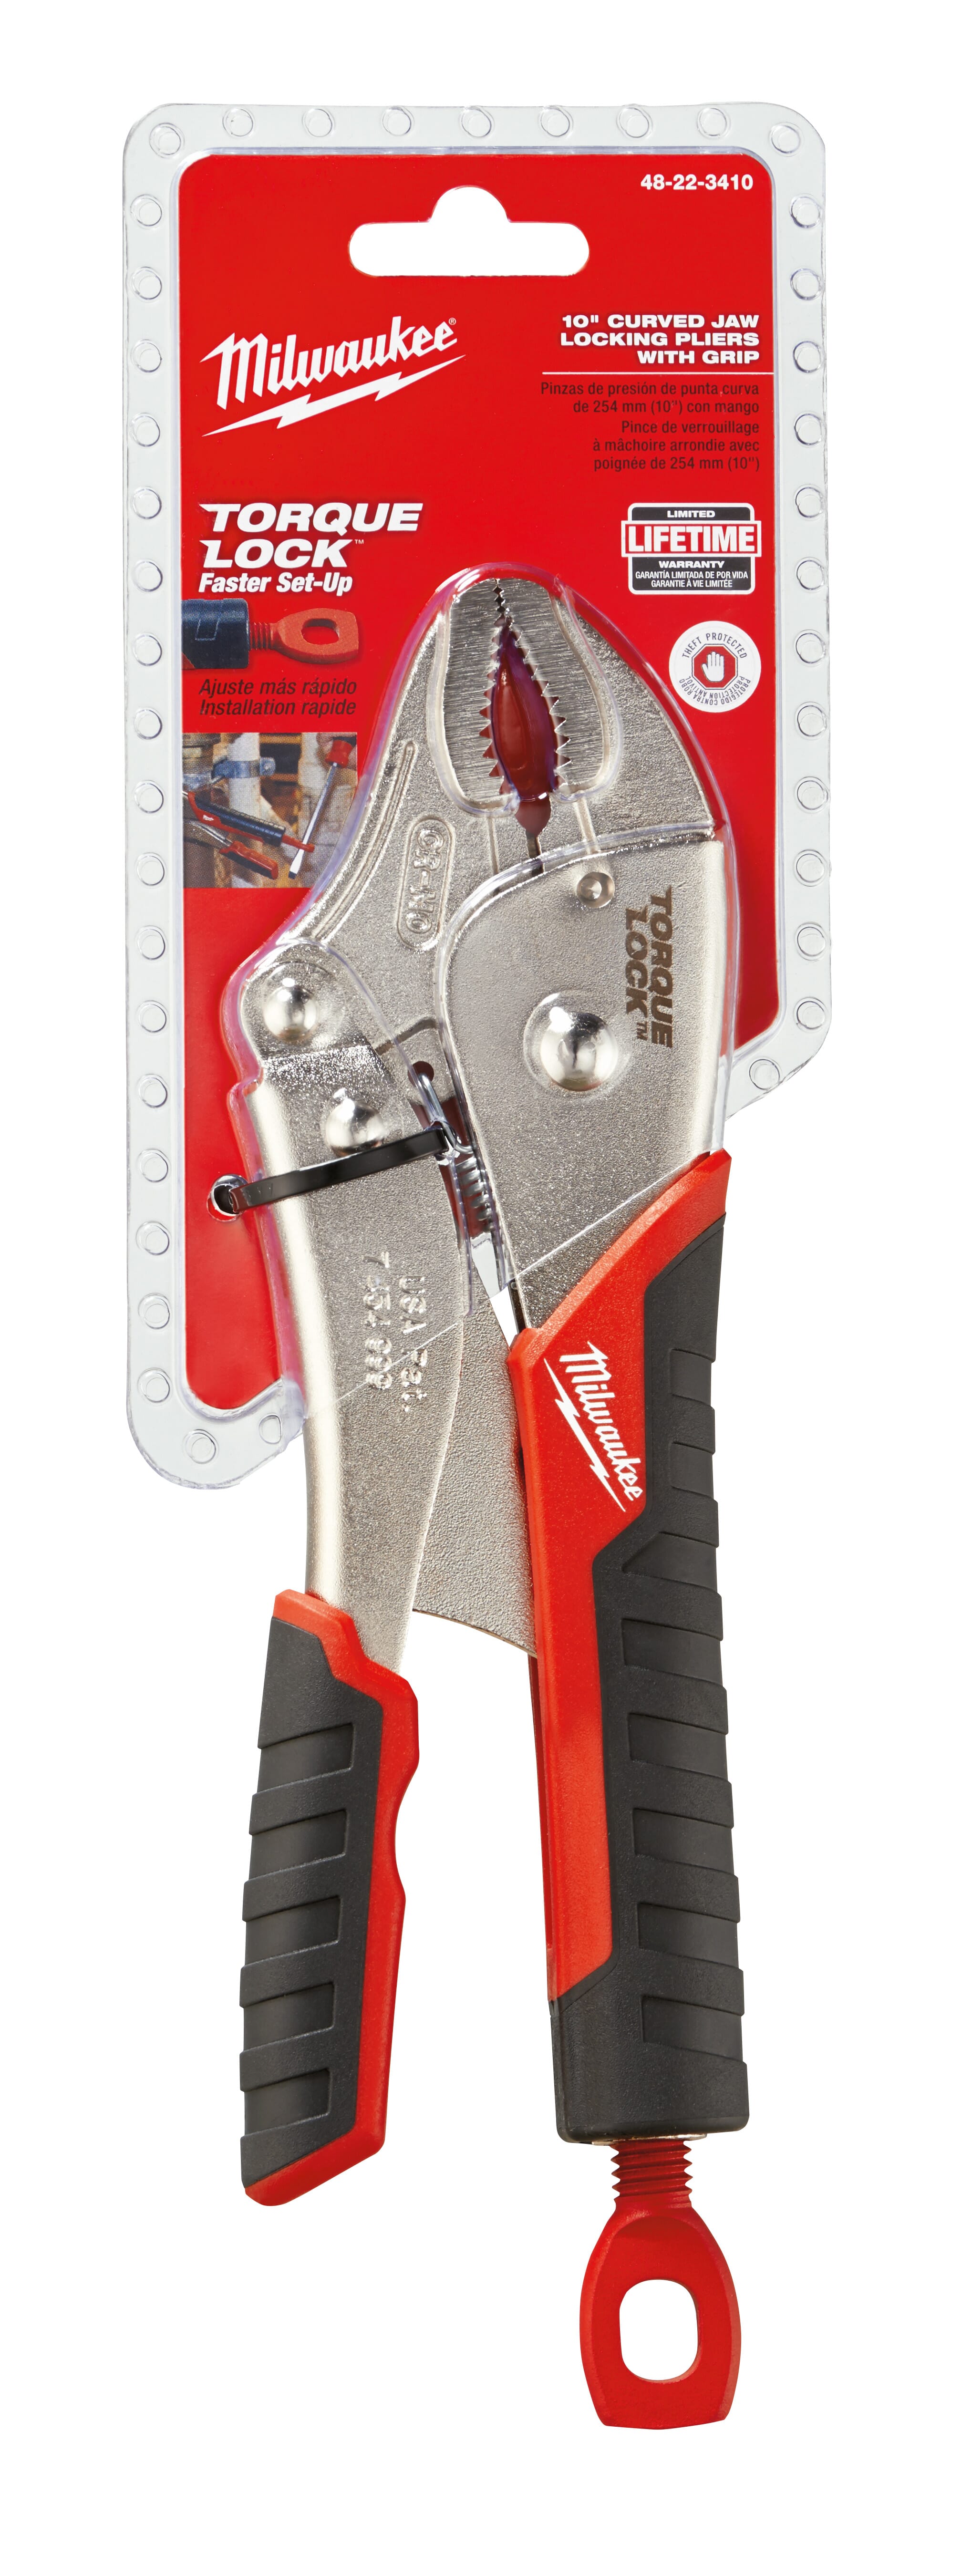 Milwaukee® TORQUE LOCK™ 48-22-3410 1-Handed Lever Locking Plier, 2 in Nominal, 1-5/32 in L x 29/64 in W x 29/64 in THK Alloy Steel Curved Jaw, 10 in OAL